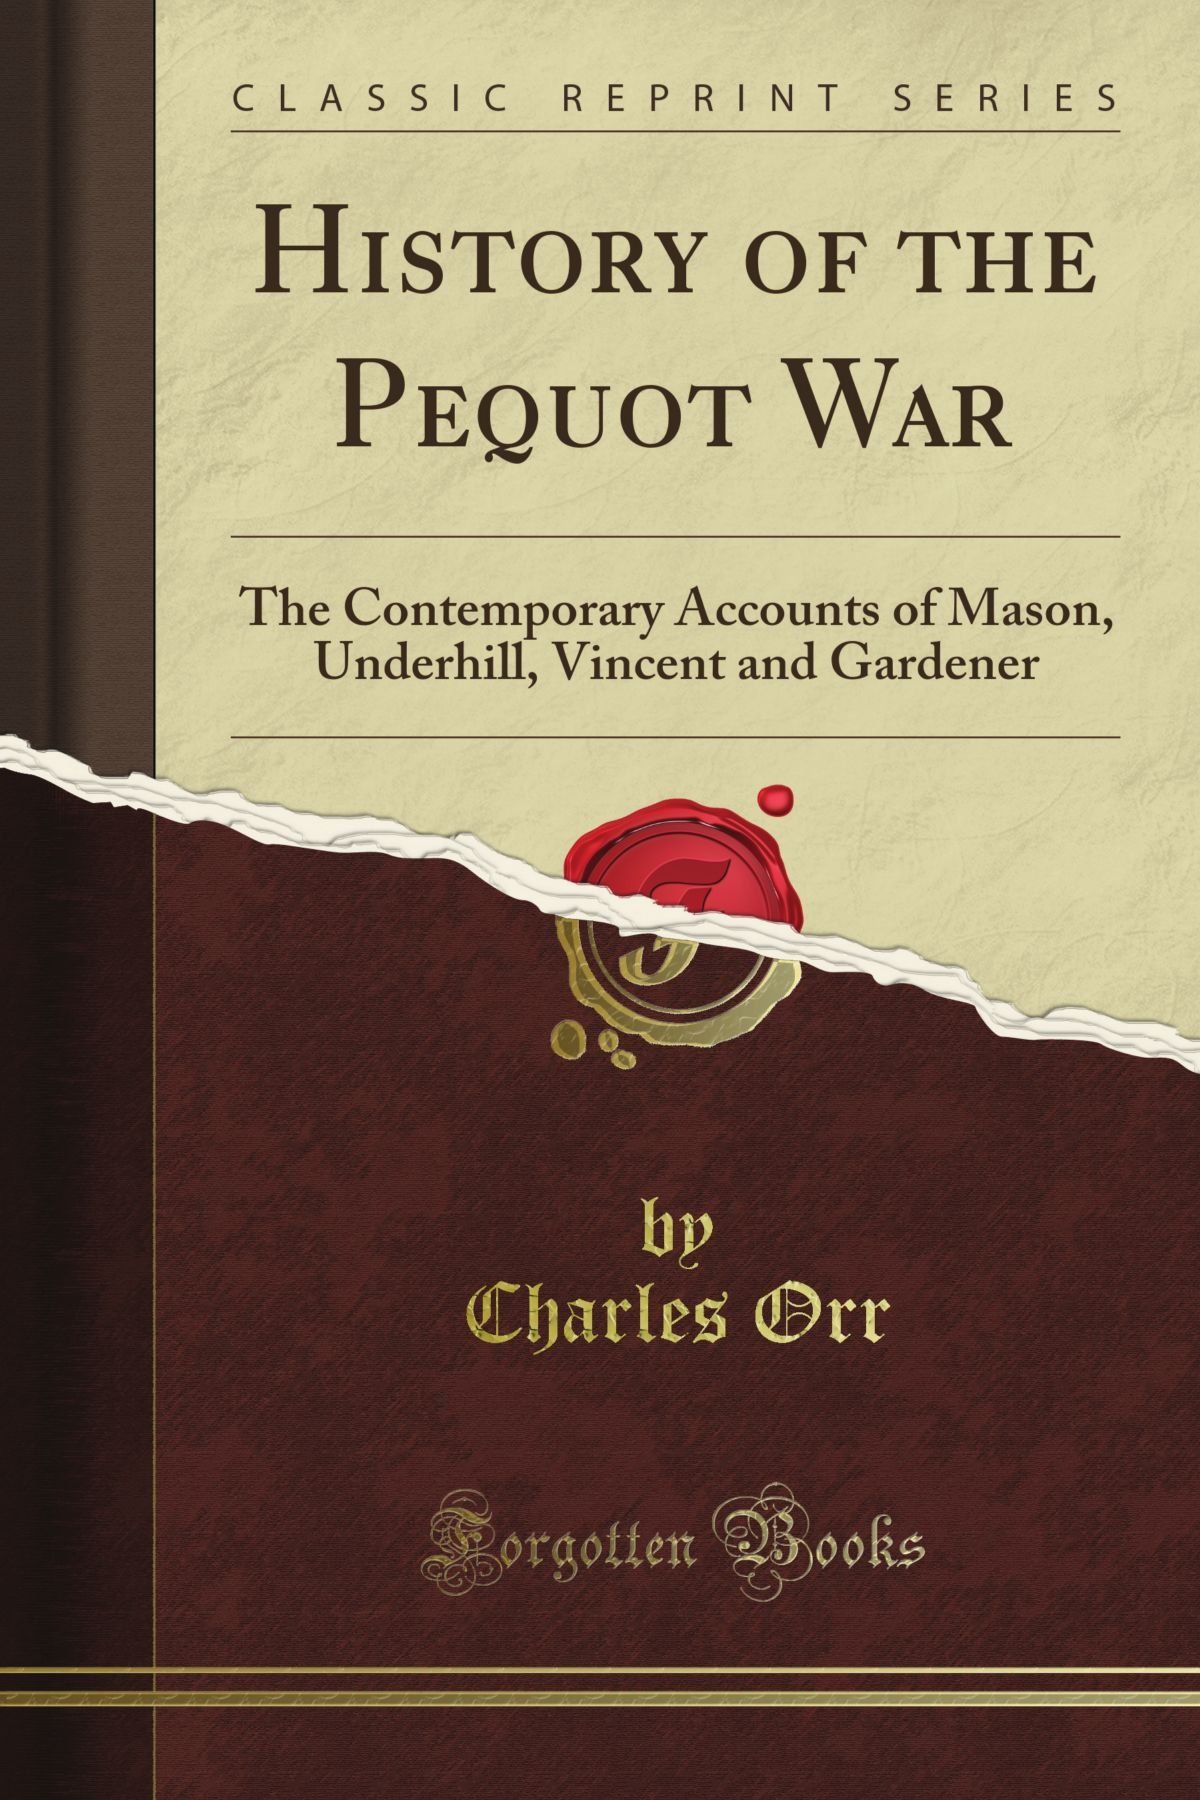 History of the Pequot War book cover